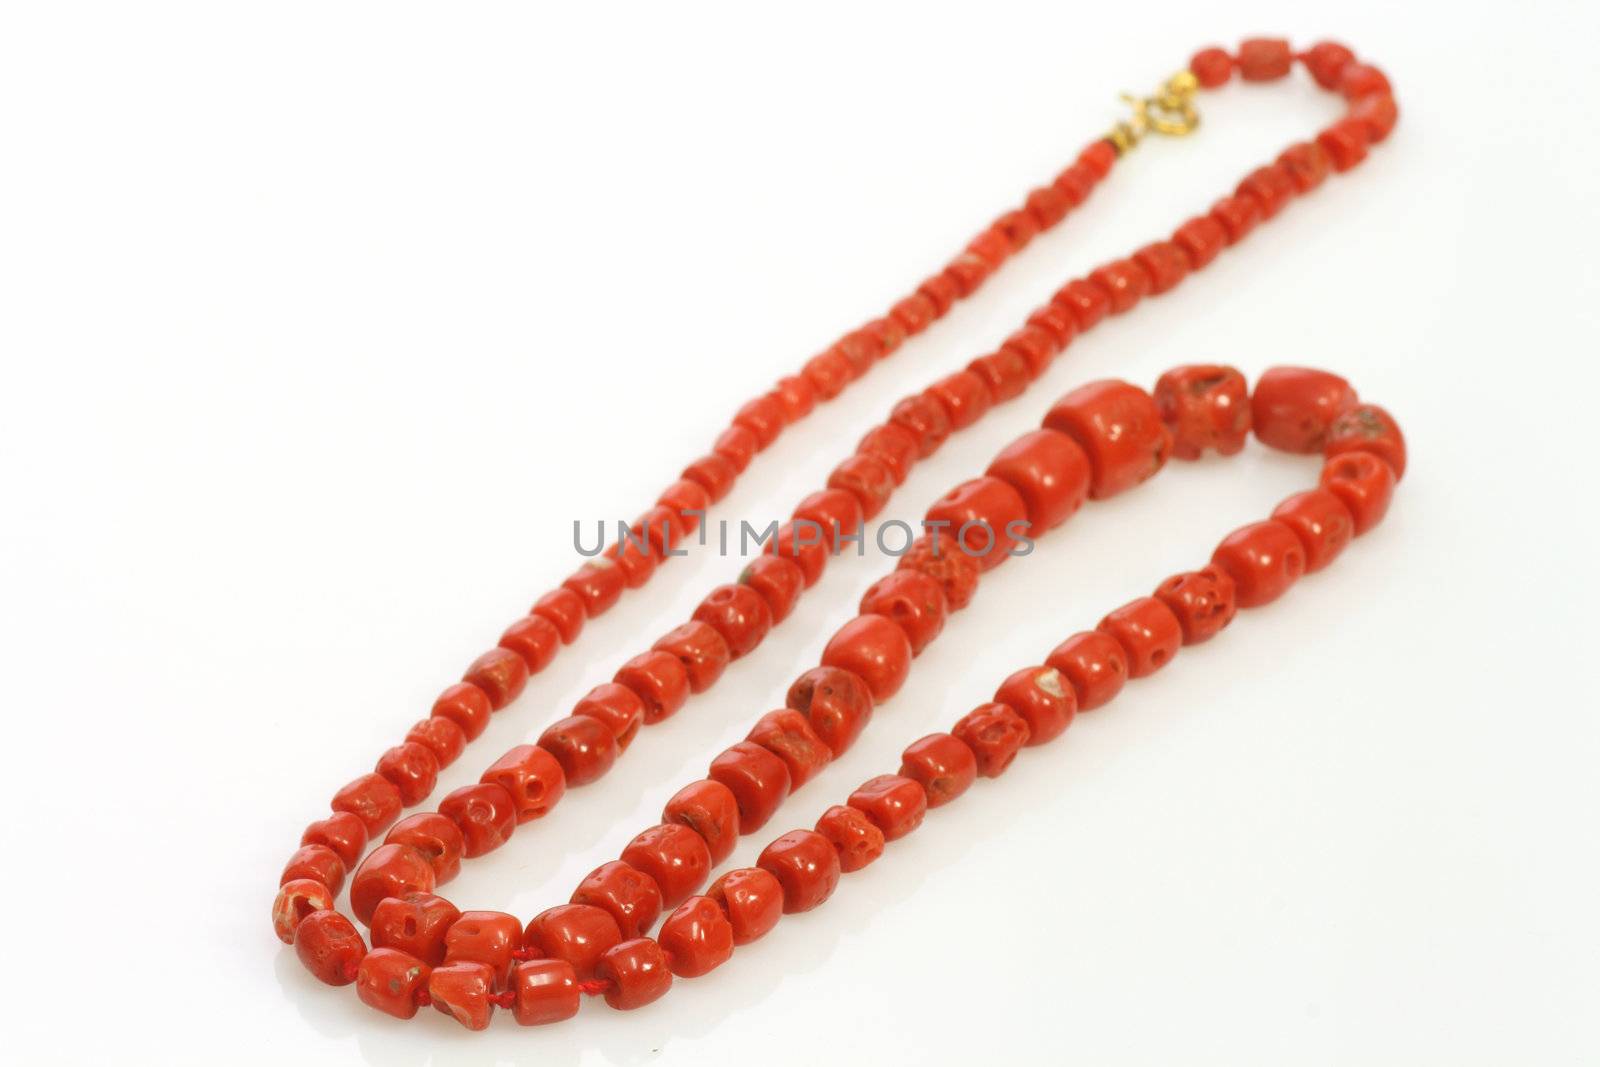 Necklace with perl on bright background